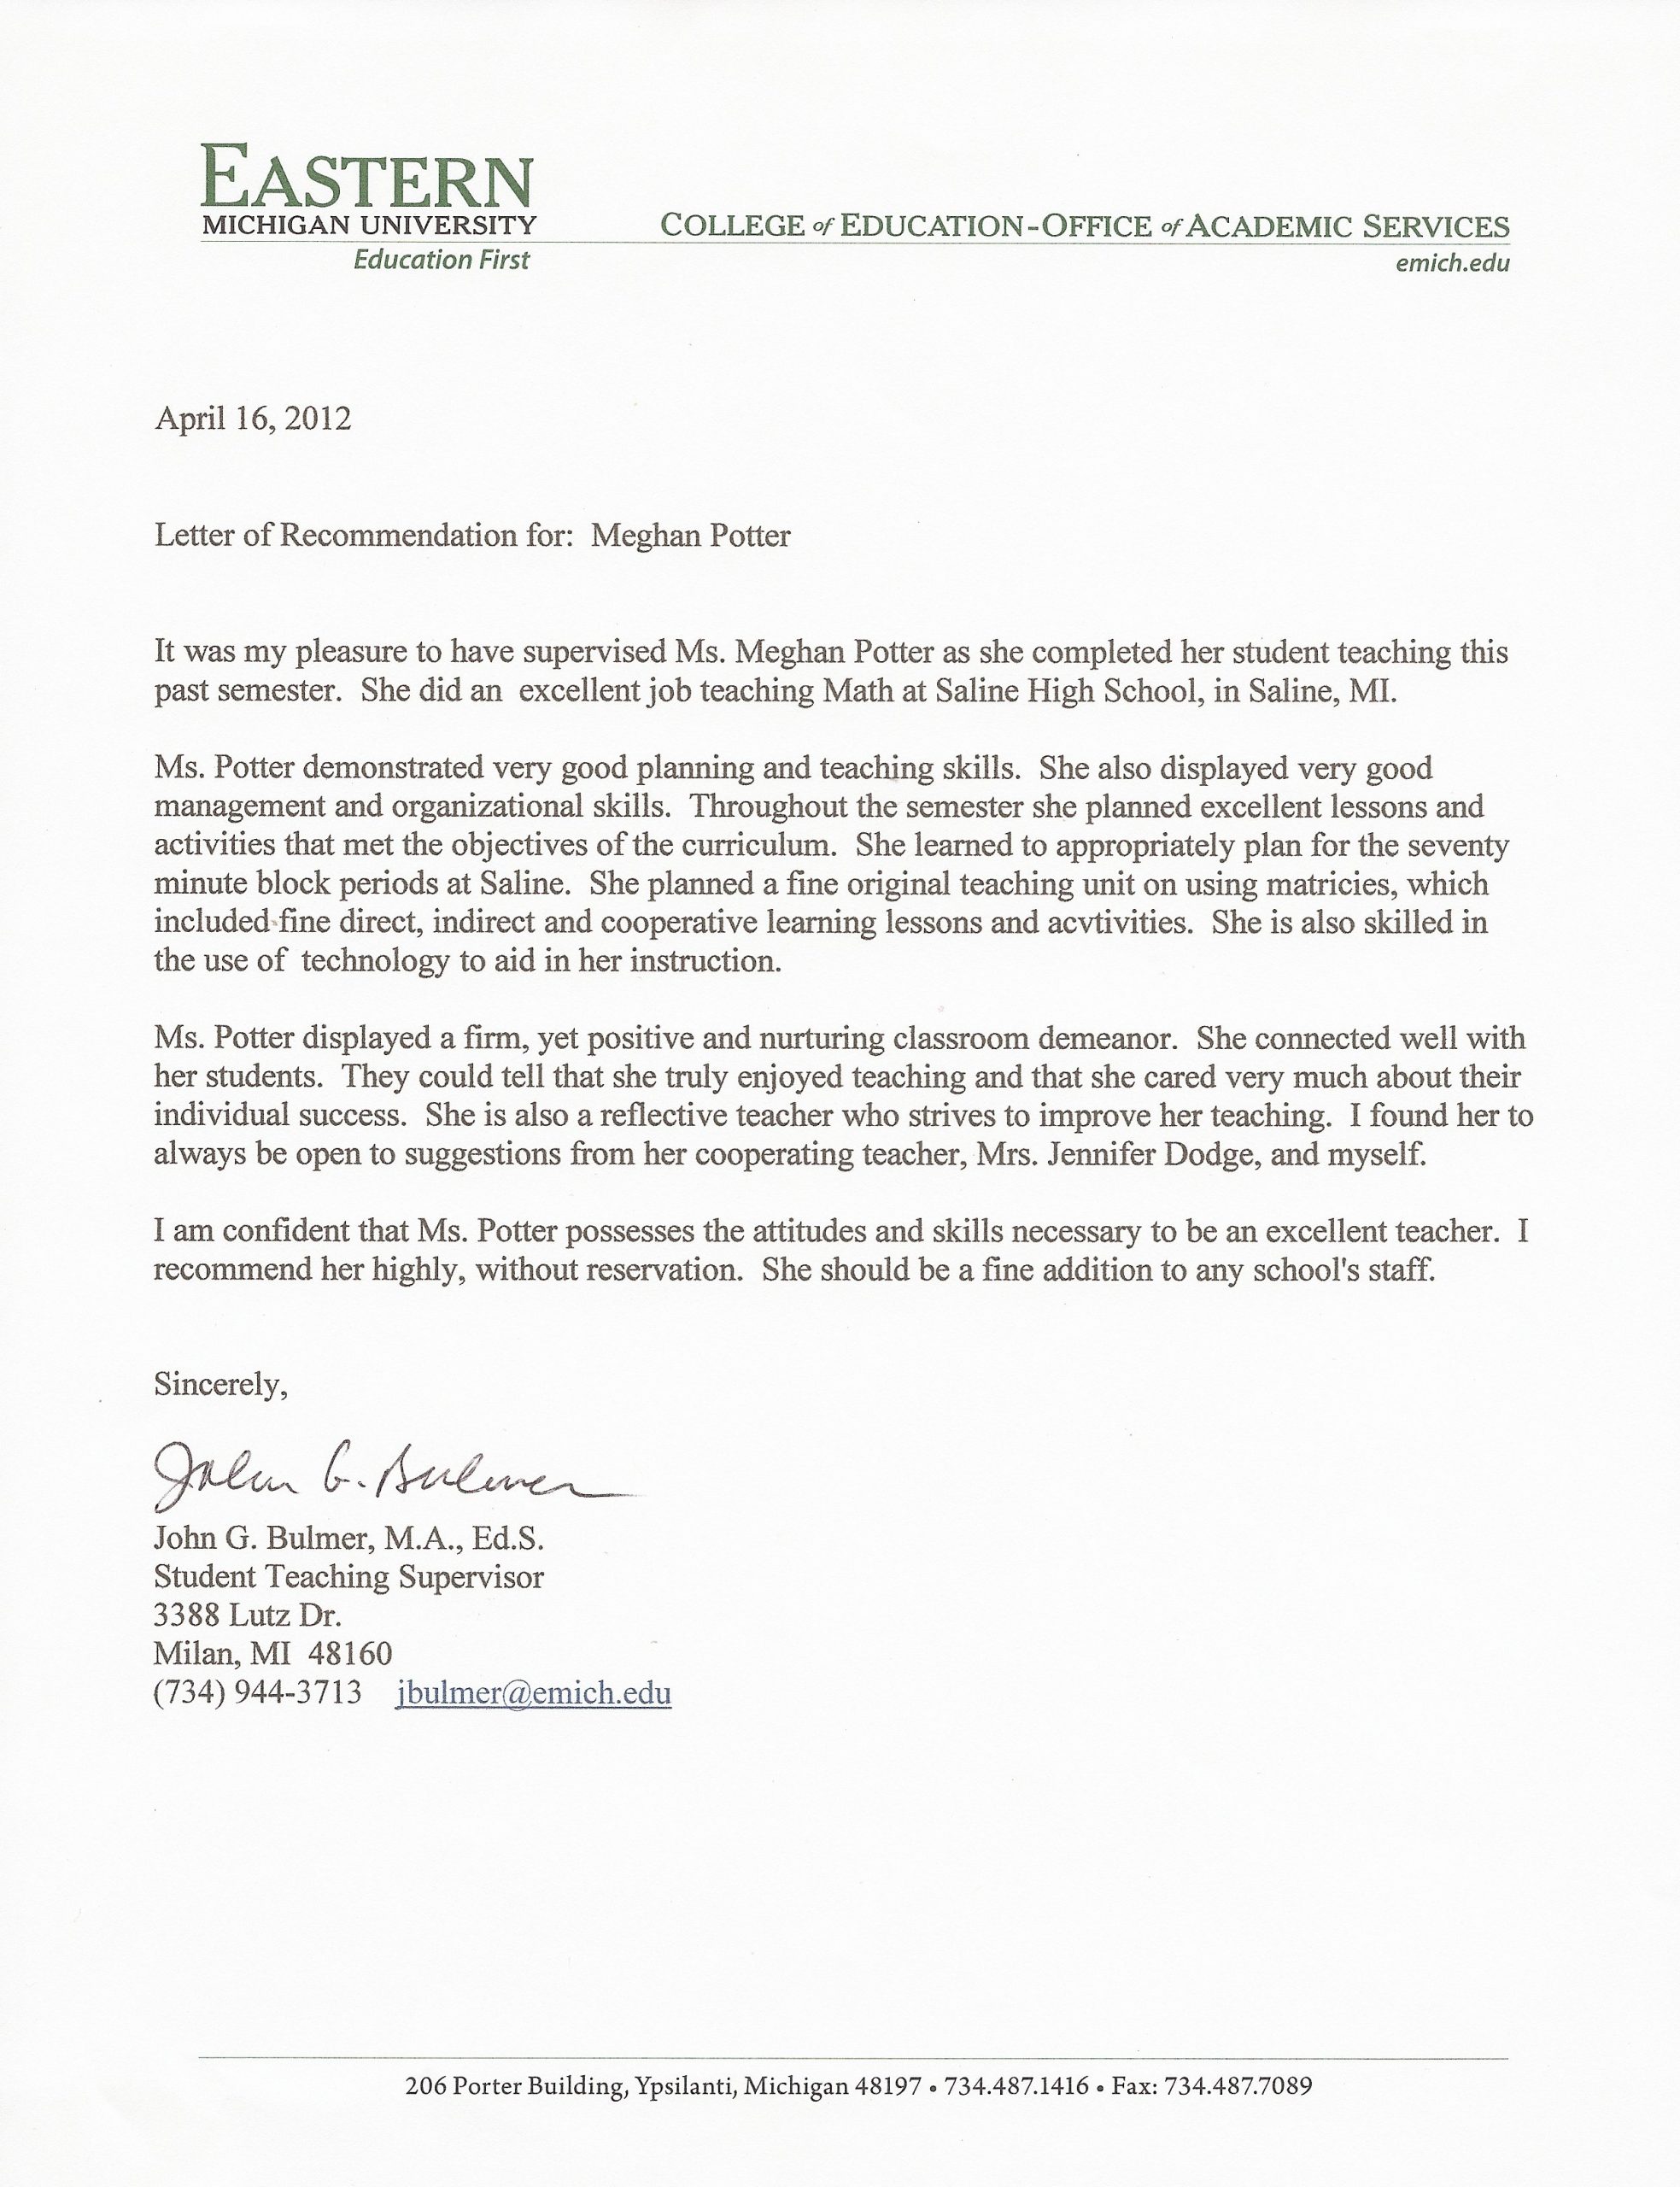 Cooperating Teacher Recommendation Letter Sample Debandje within dimensions 2496 X 3248